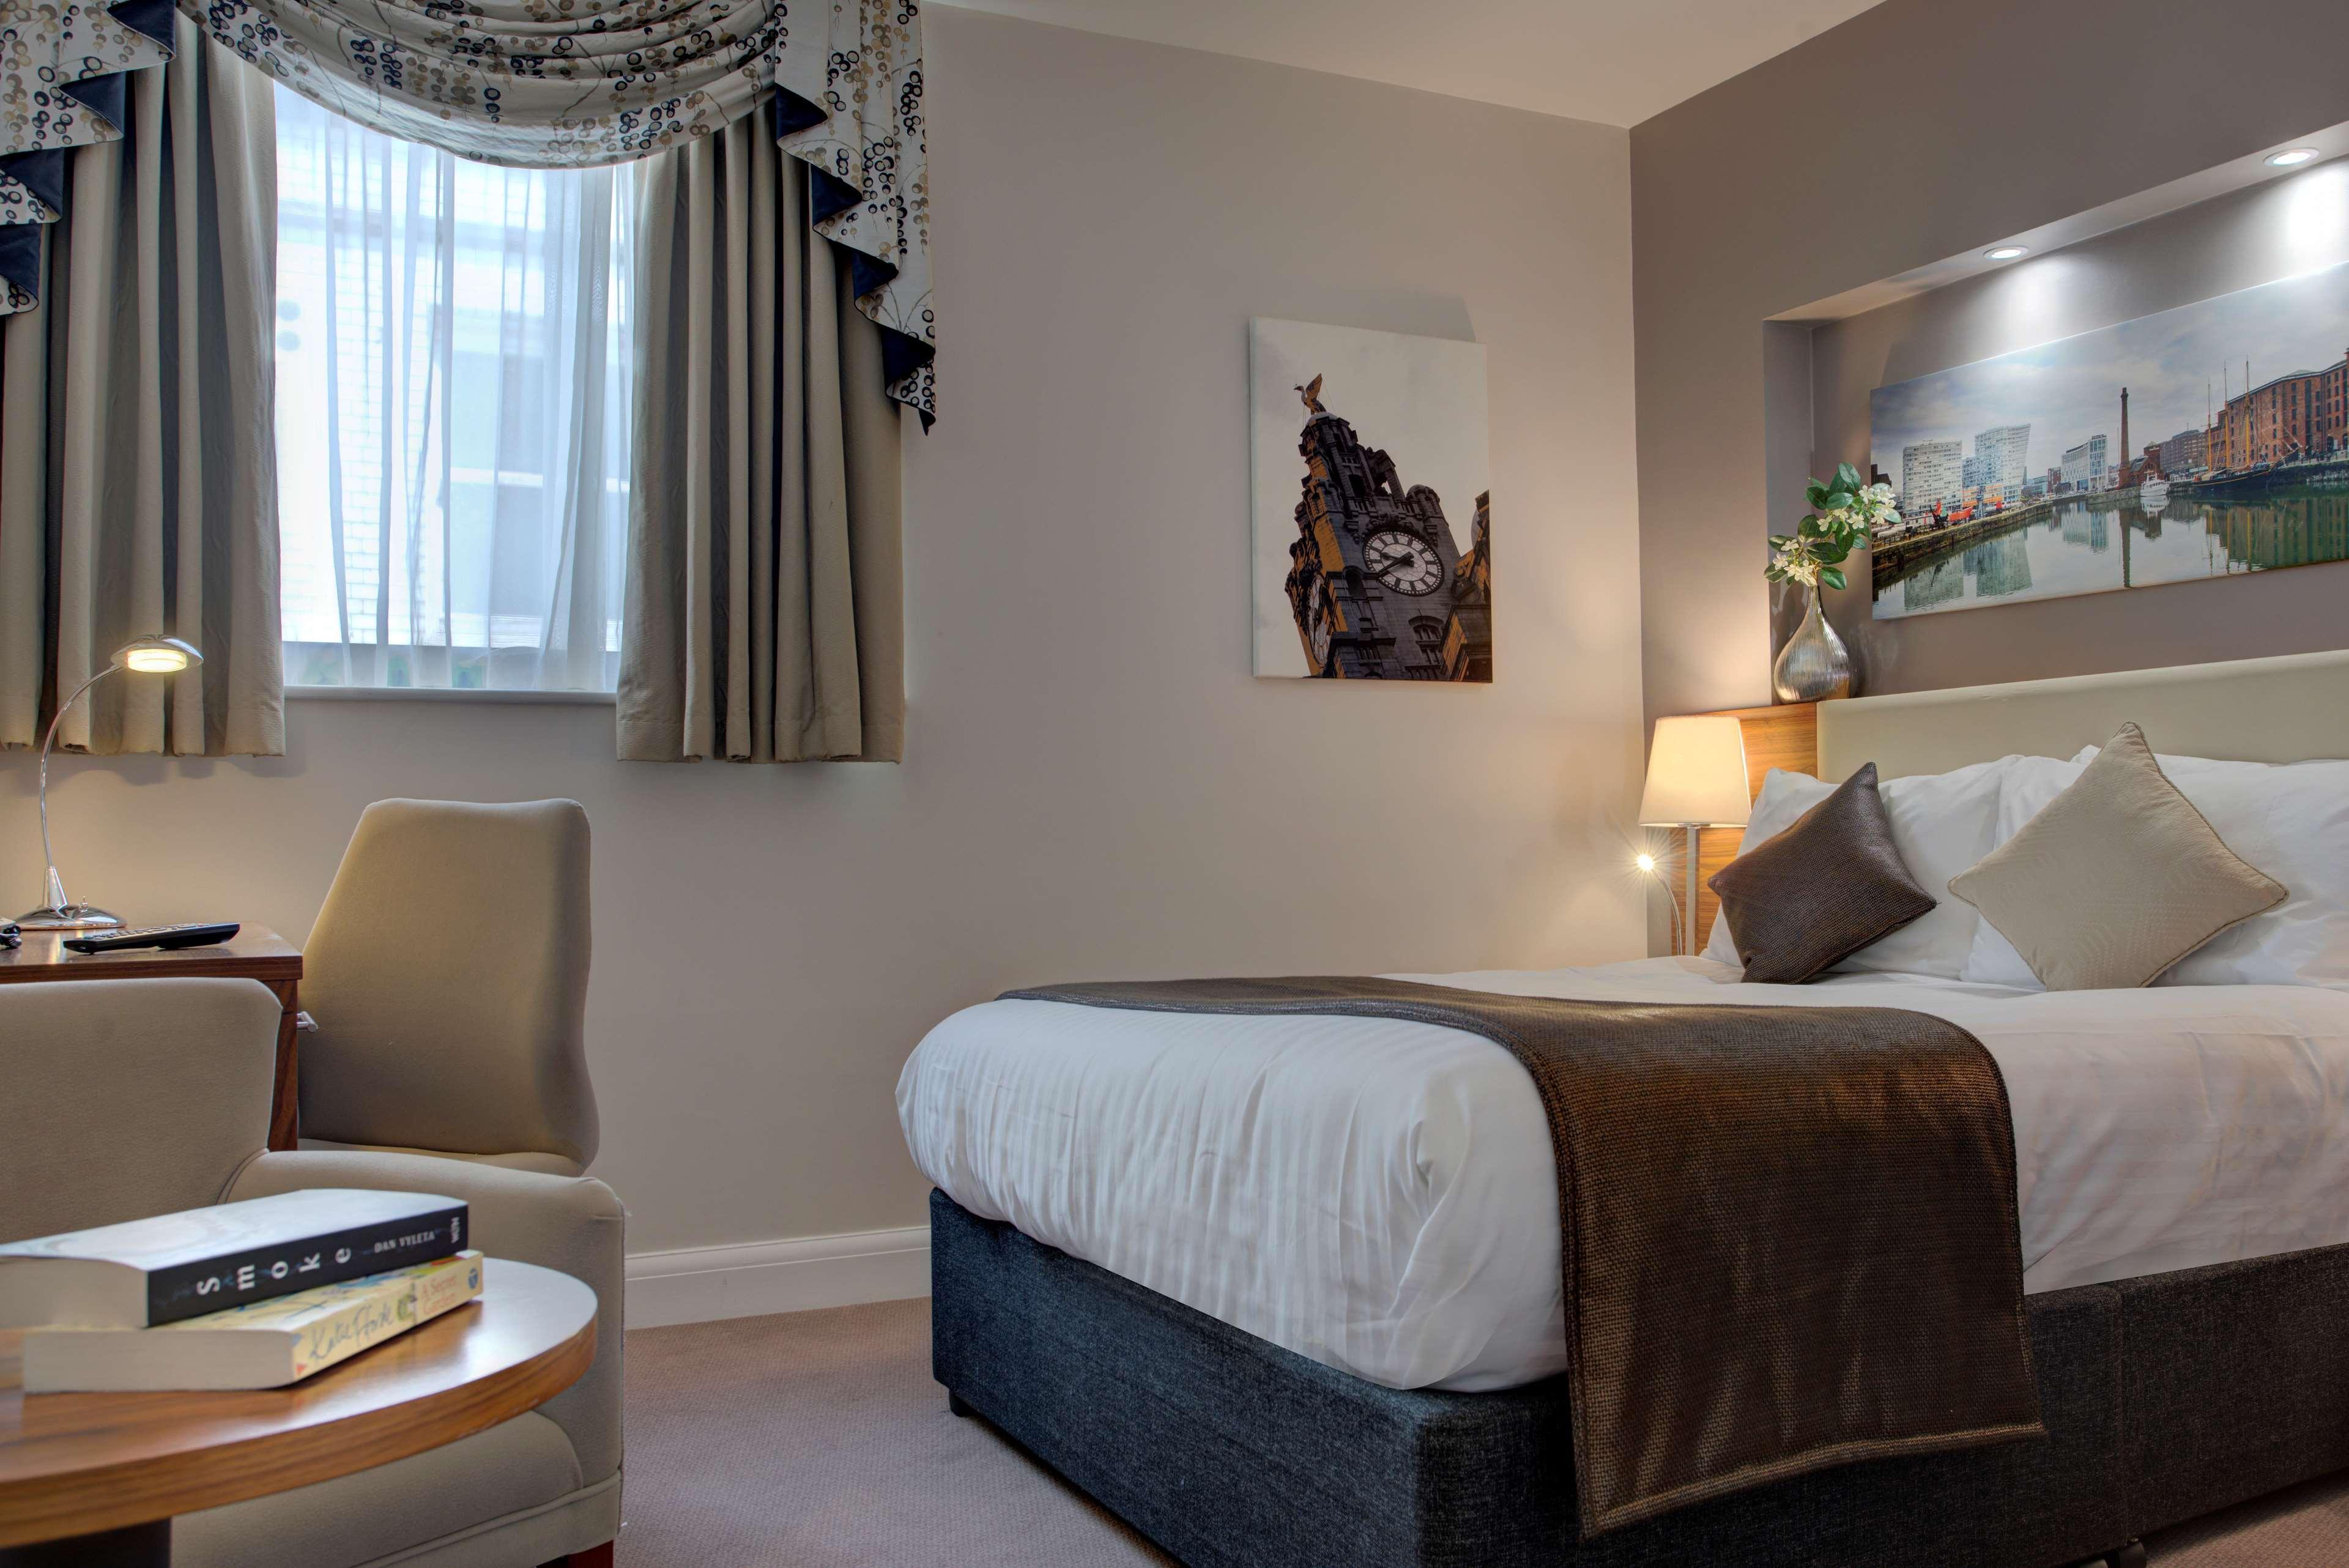 Heywood House Hotel, BW Signature Collection Liverpool Bagian luar foto